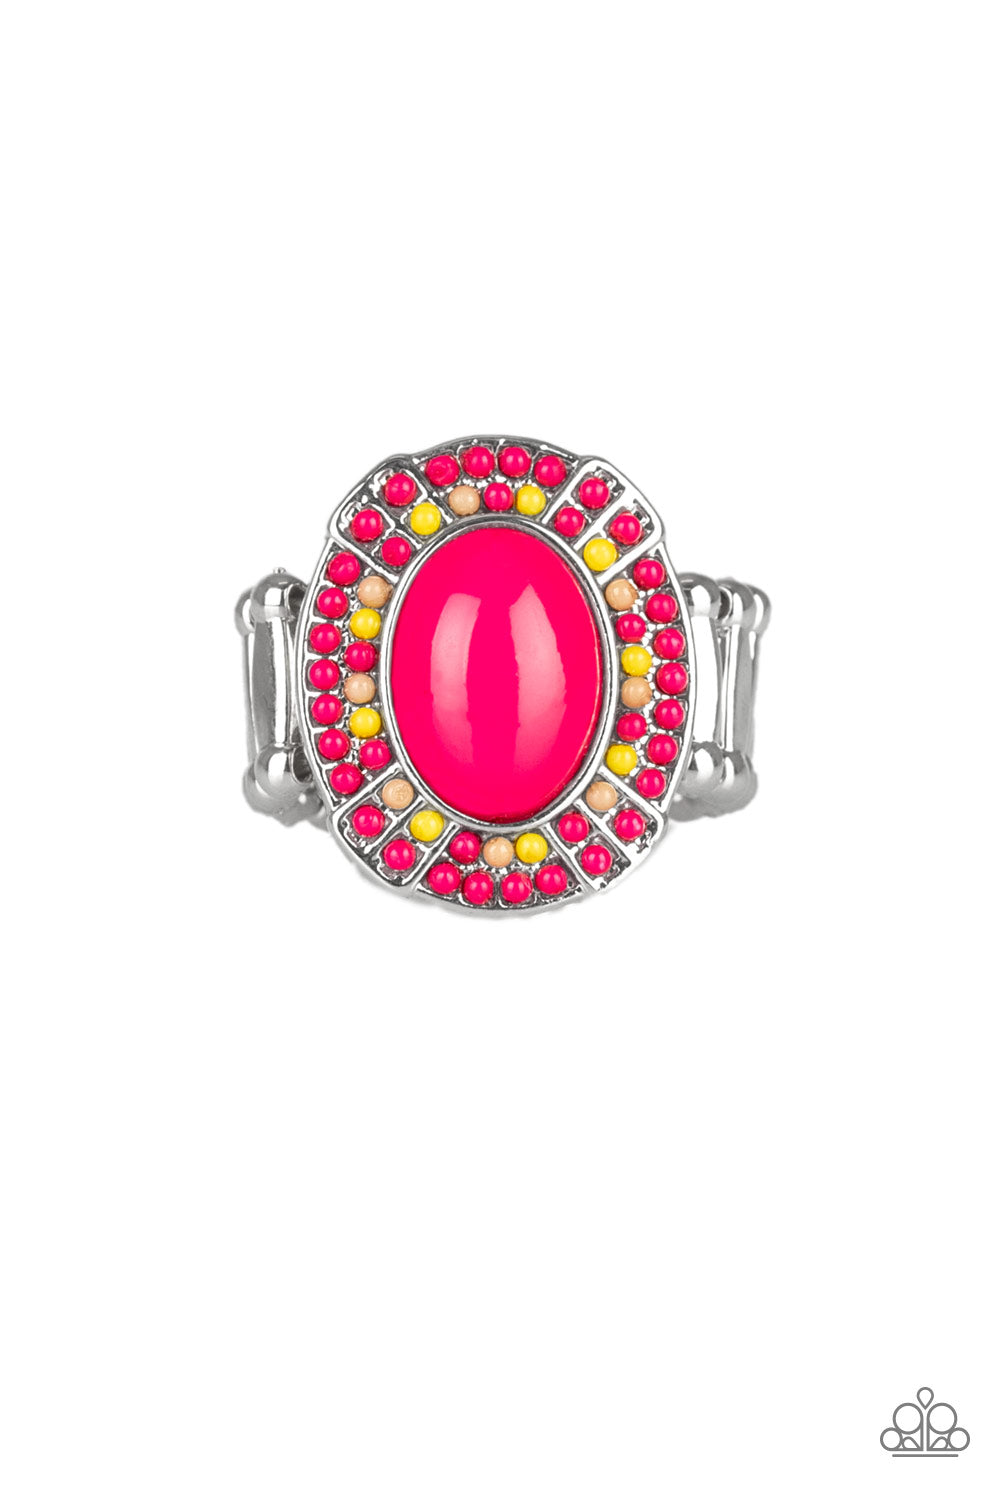 Dainty pink, yellow, and brown beads encircle a larger pink bead, creating a colorful frame atop the finger. Features a stretchy band for a flexible fit.